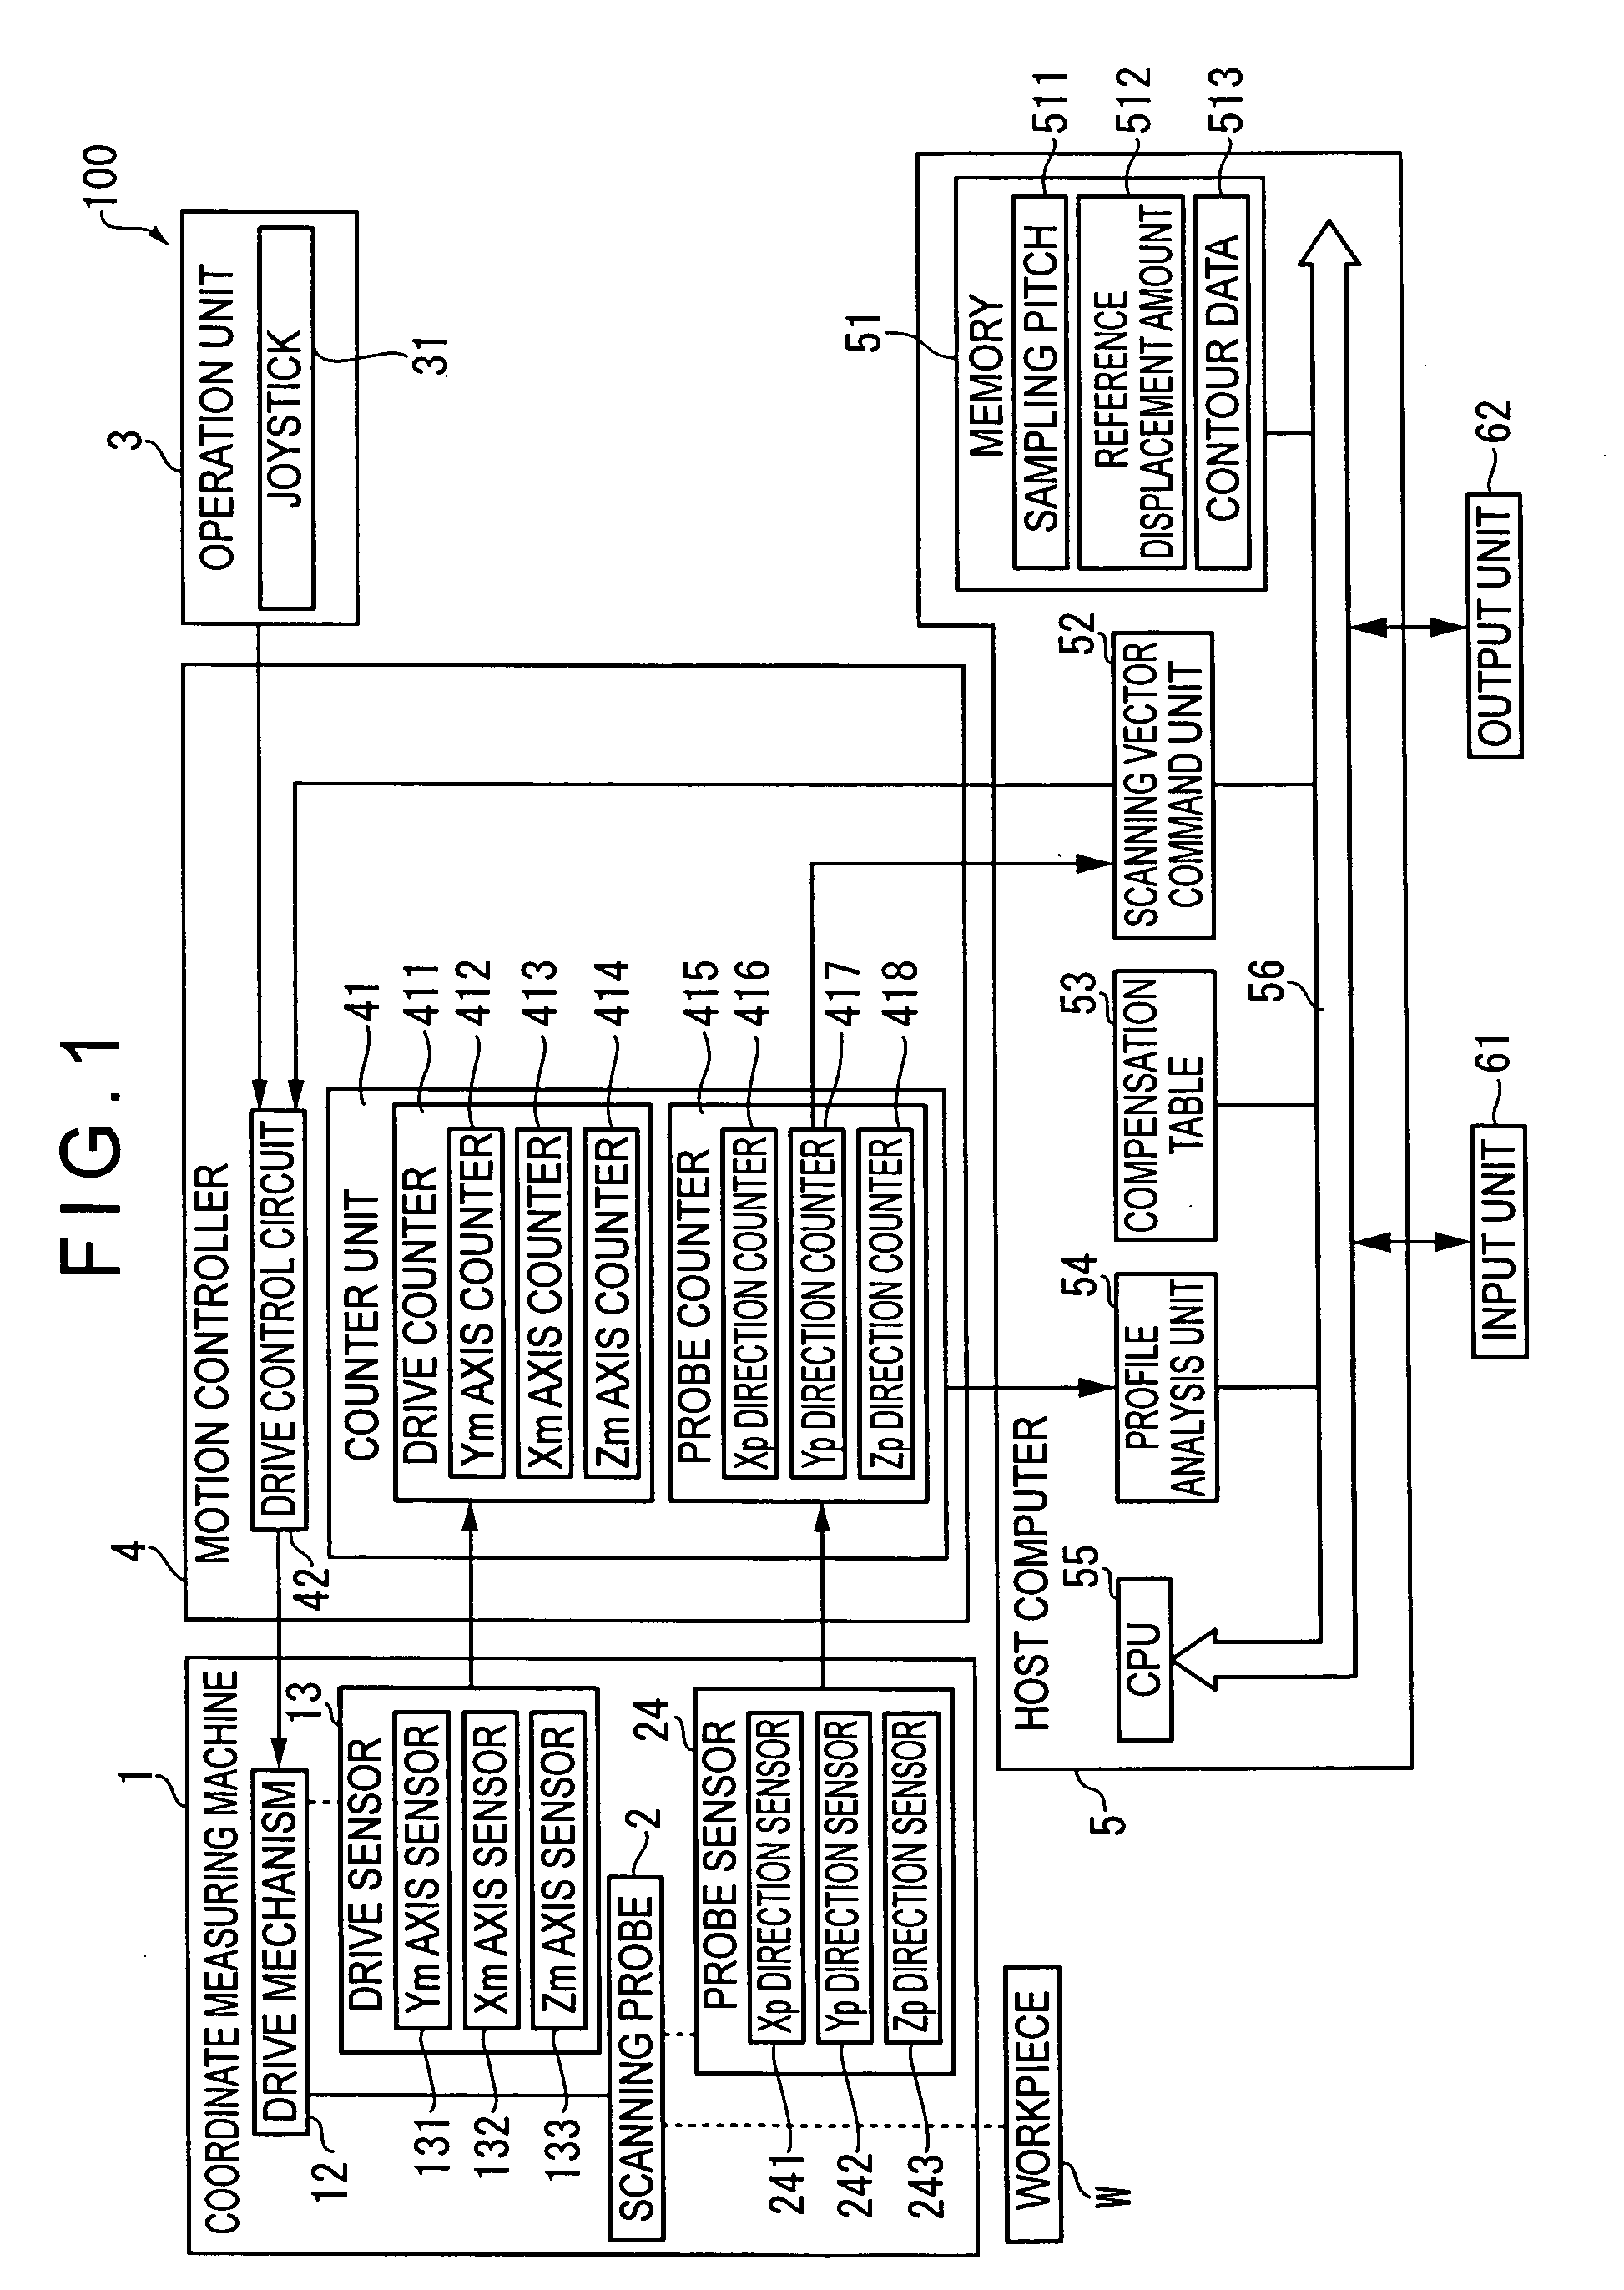 Surface scan measuring device and method of forming compensation table for scanning probe